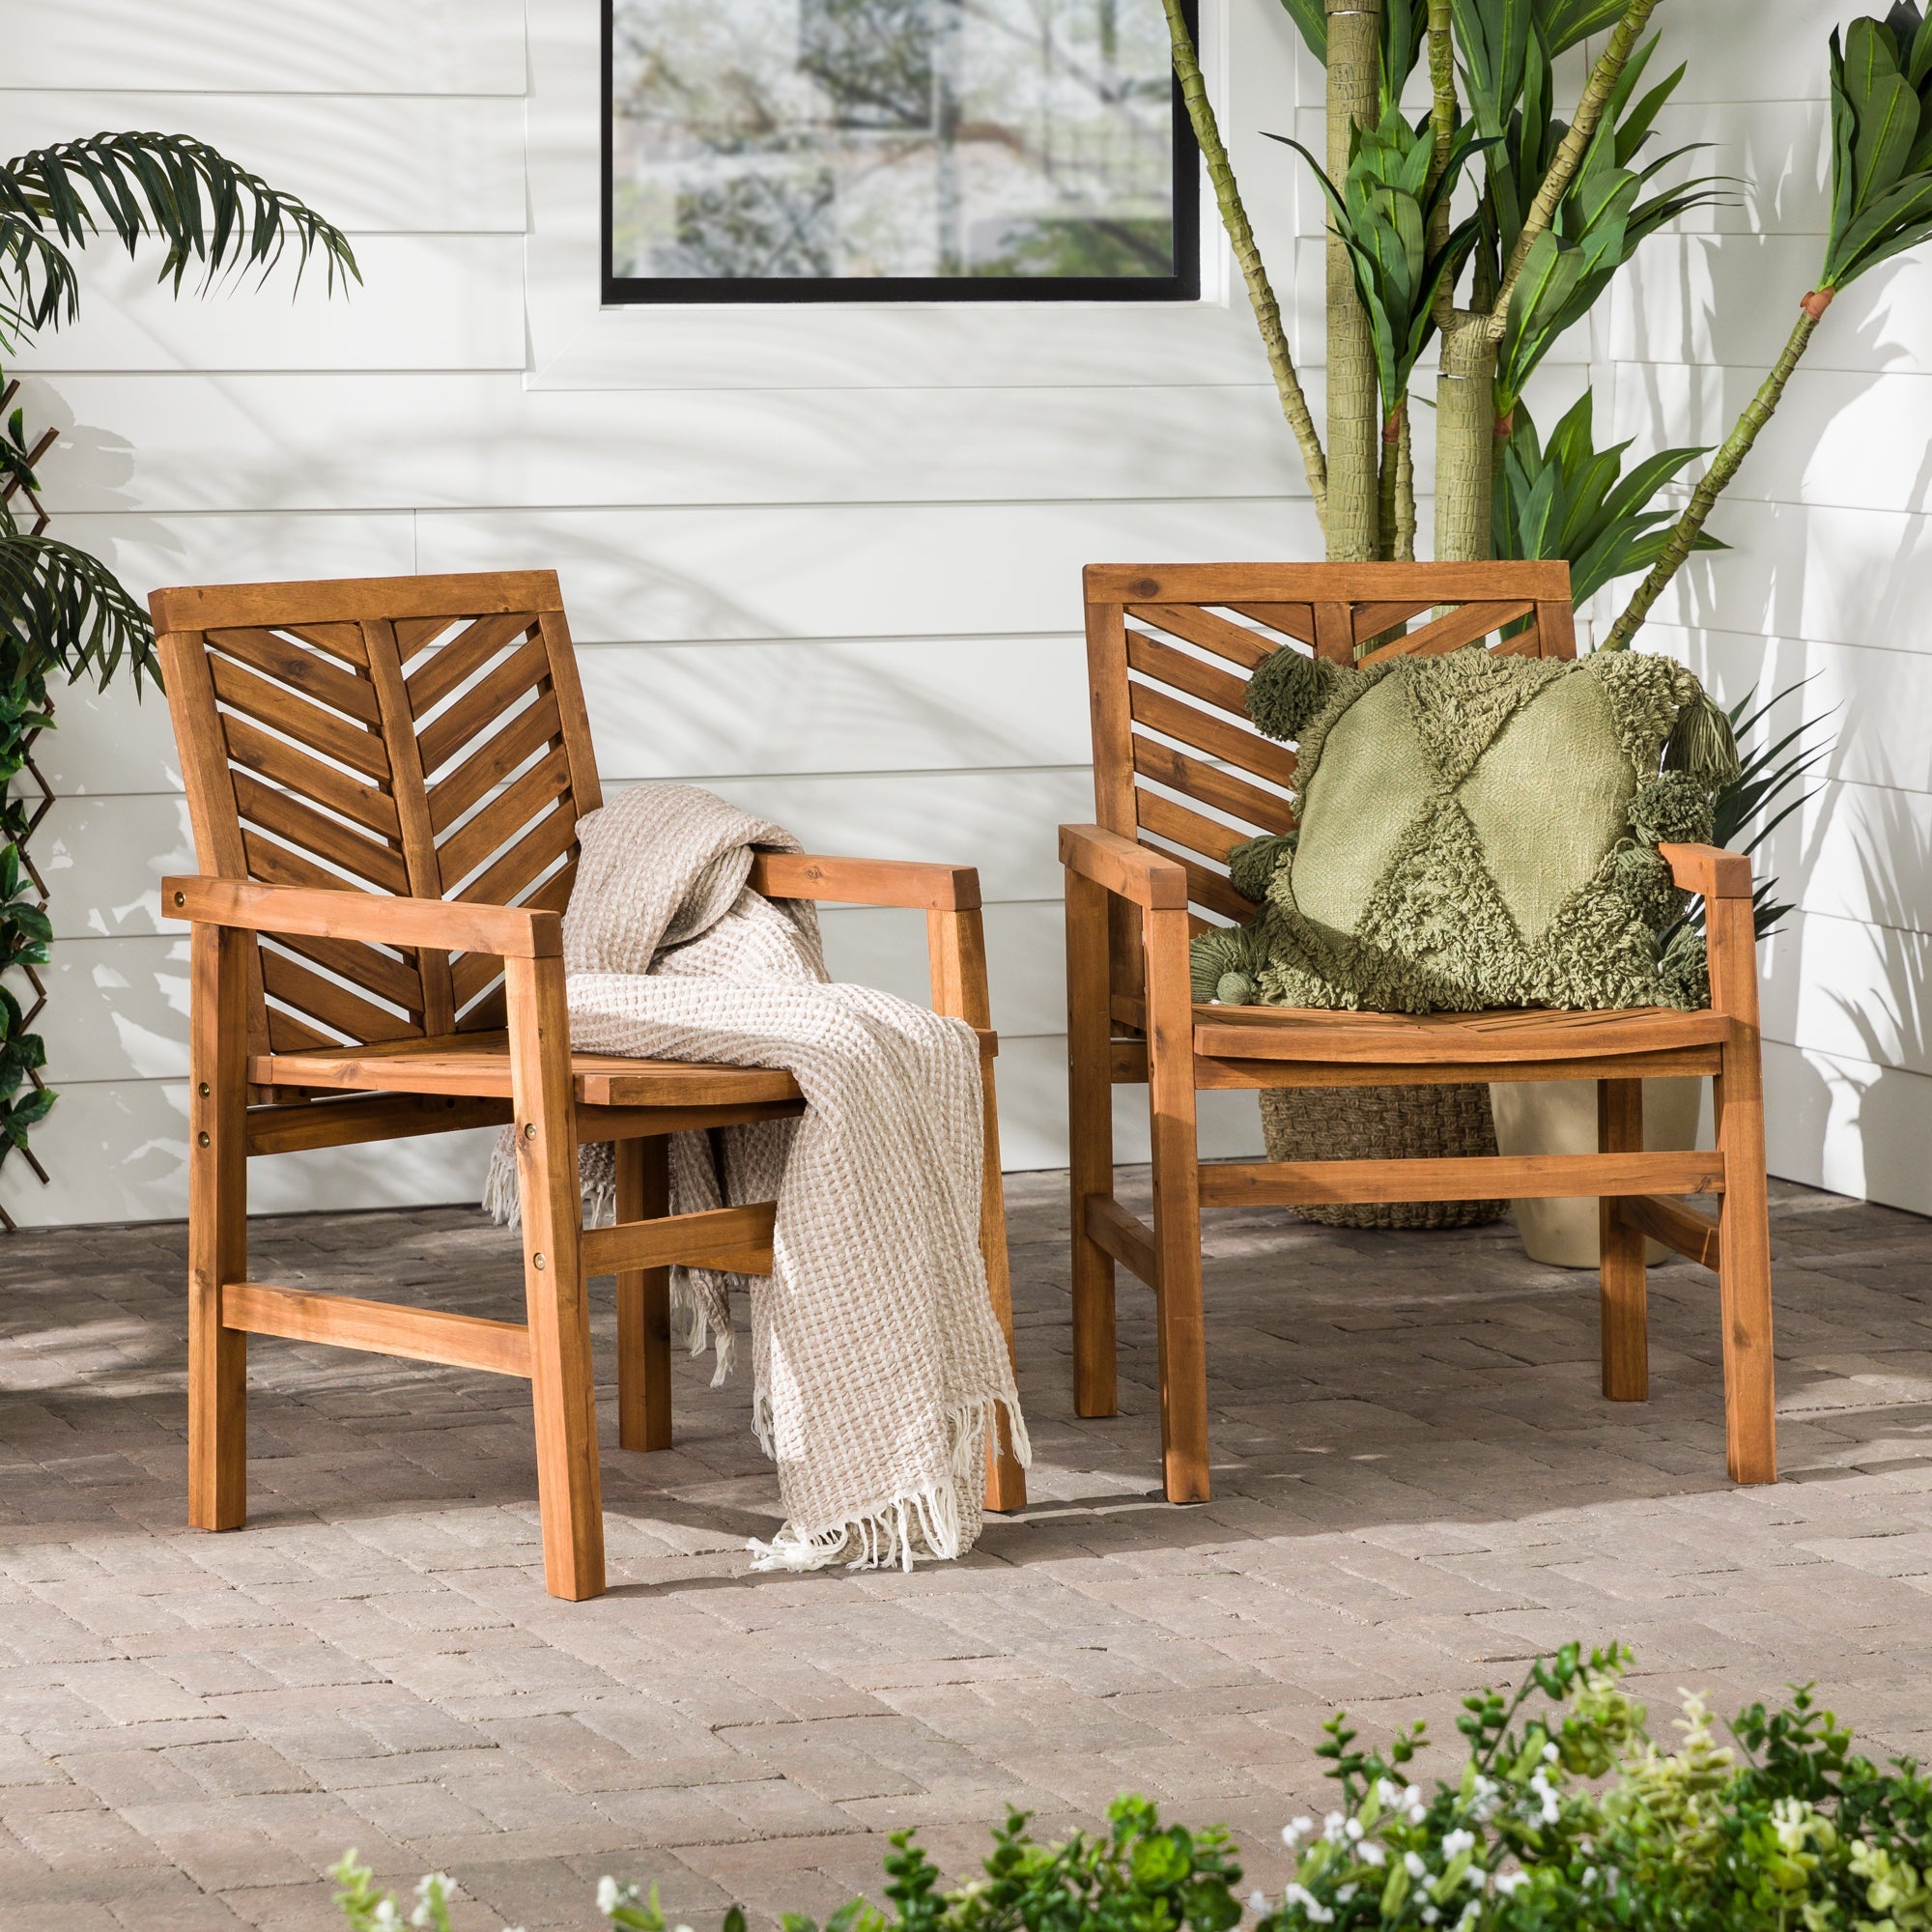 Gilded Chevron Wood Patio Chair, Set of 2 - Outdoor Patio Chair